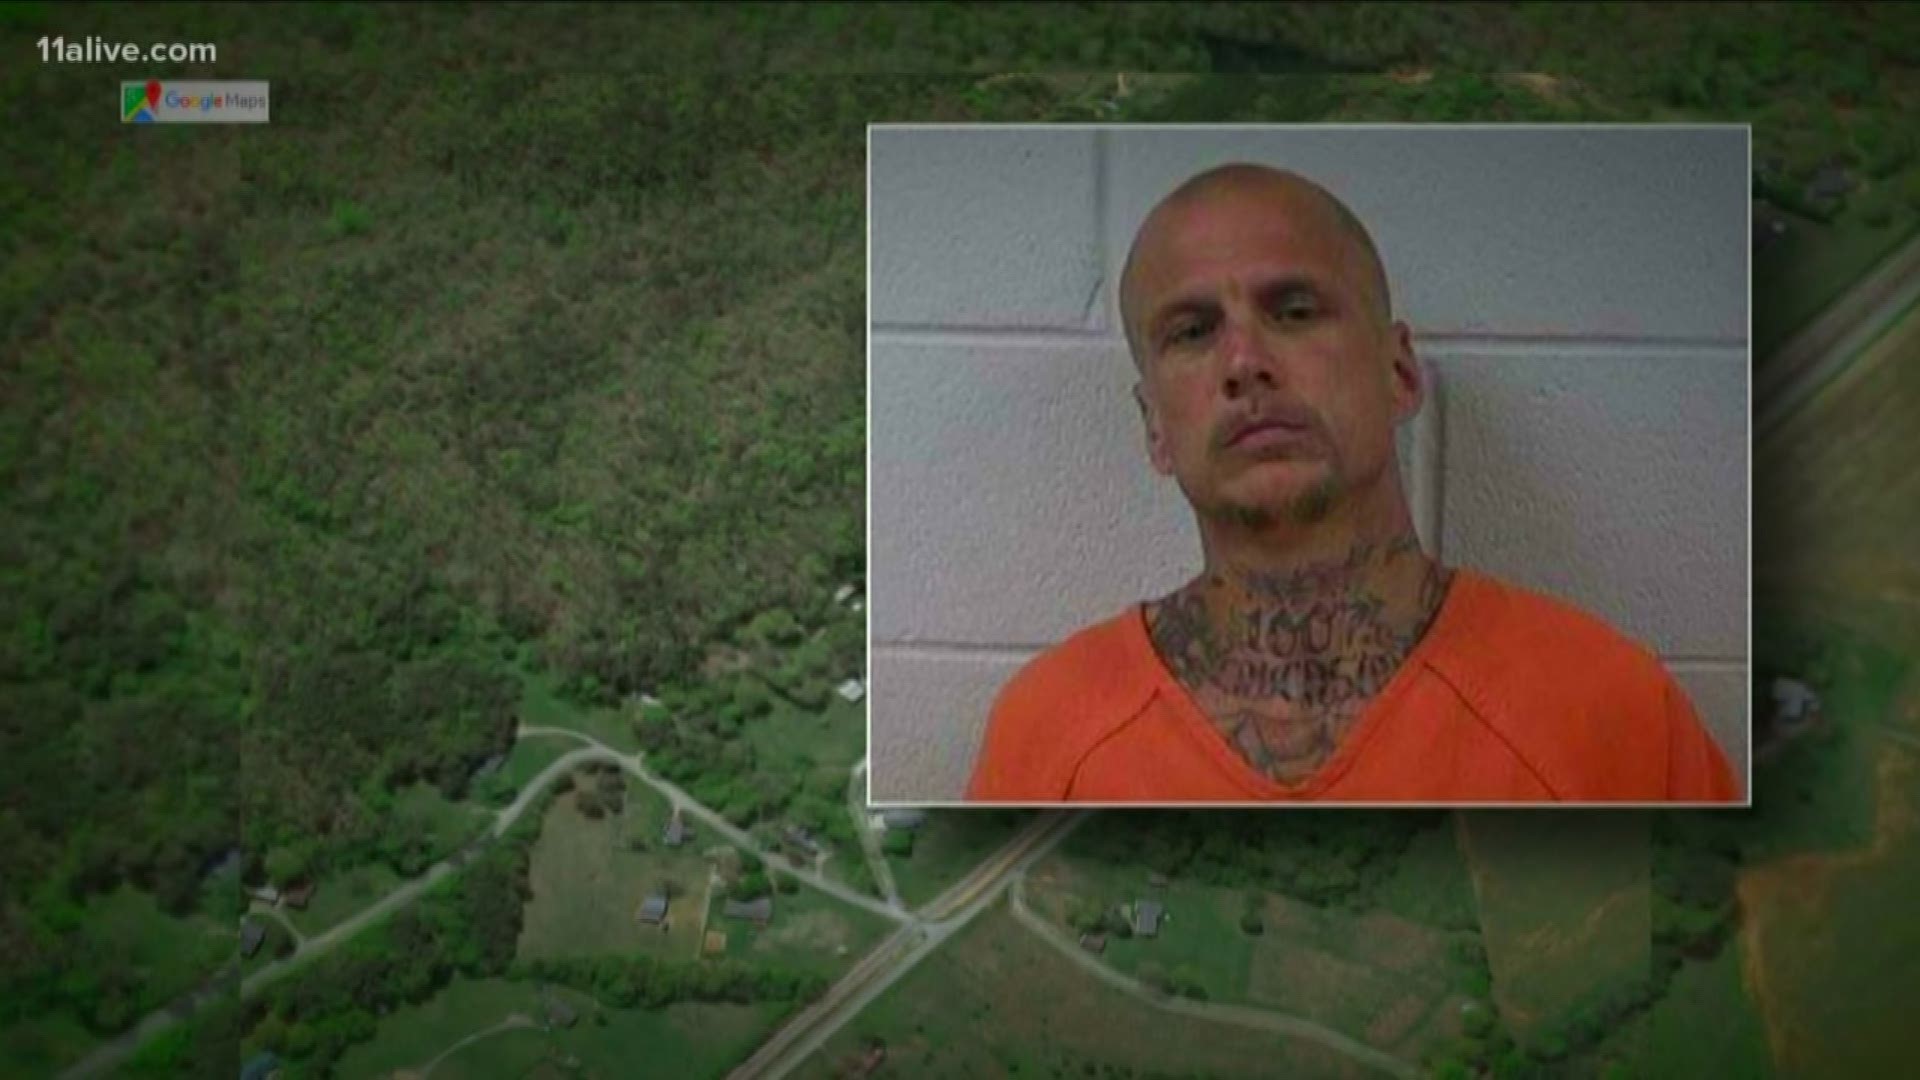 Police arrested a neo-Nazi gang member who had just gotten out of prison in the case.